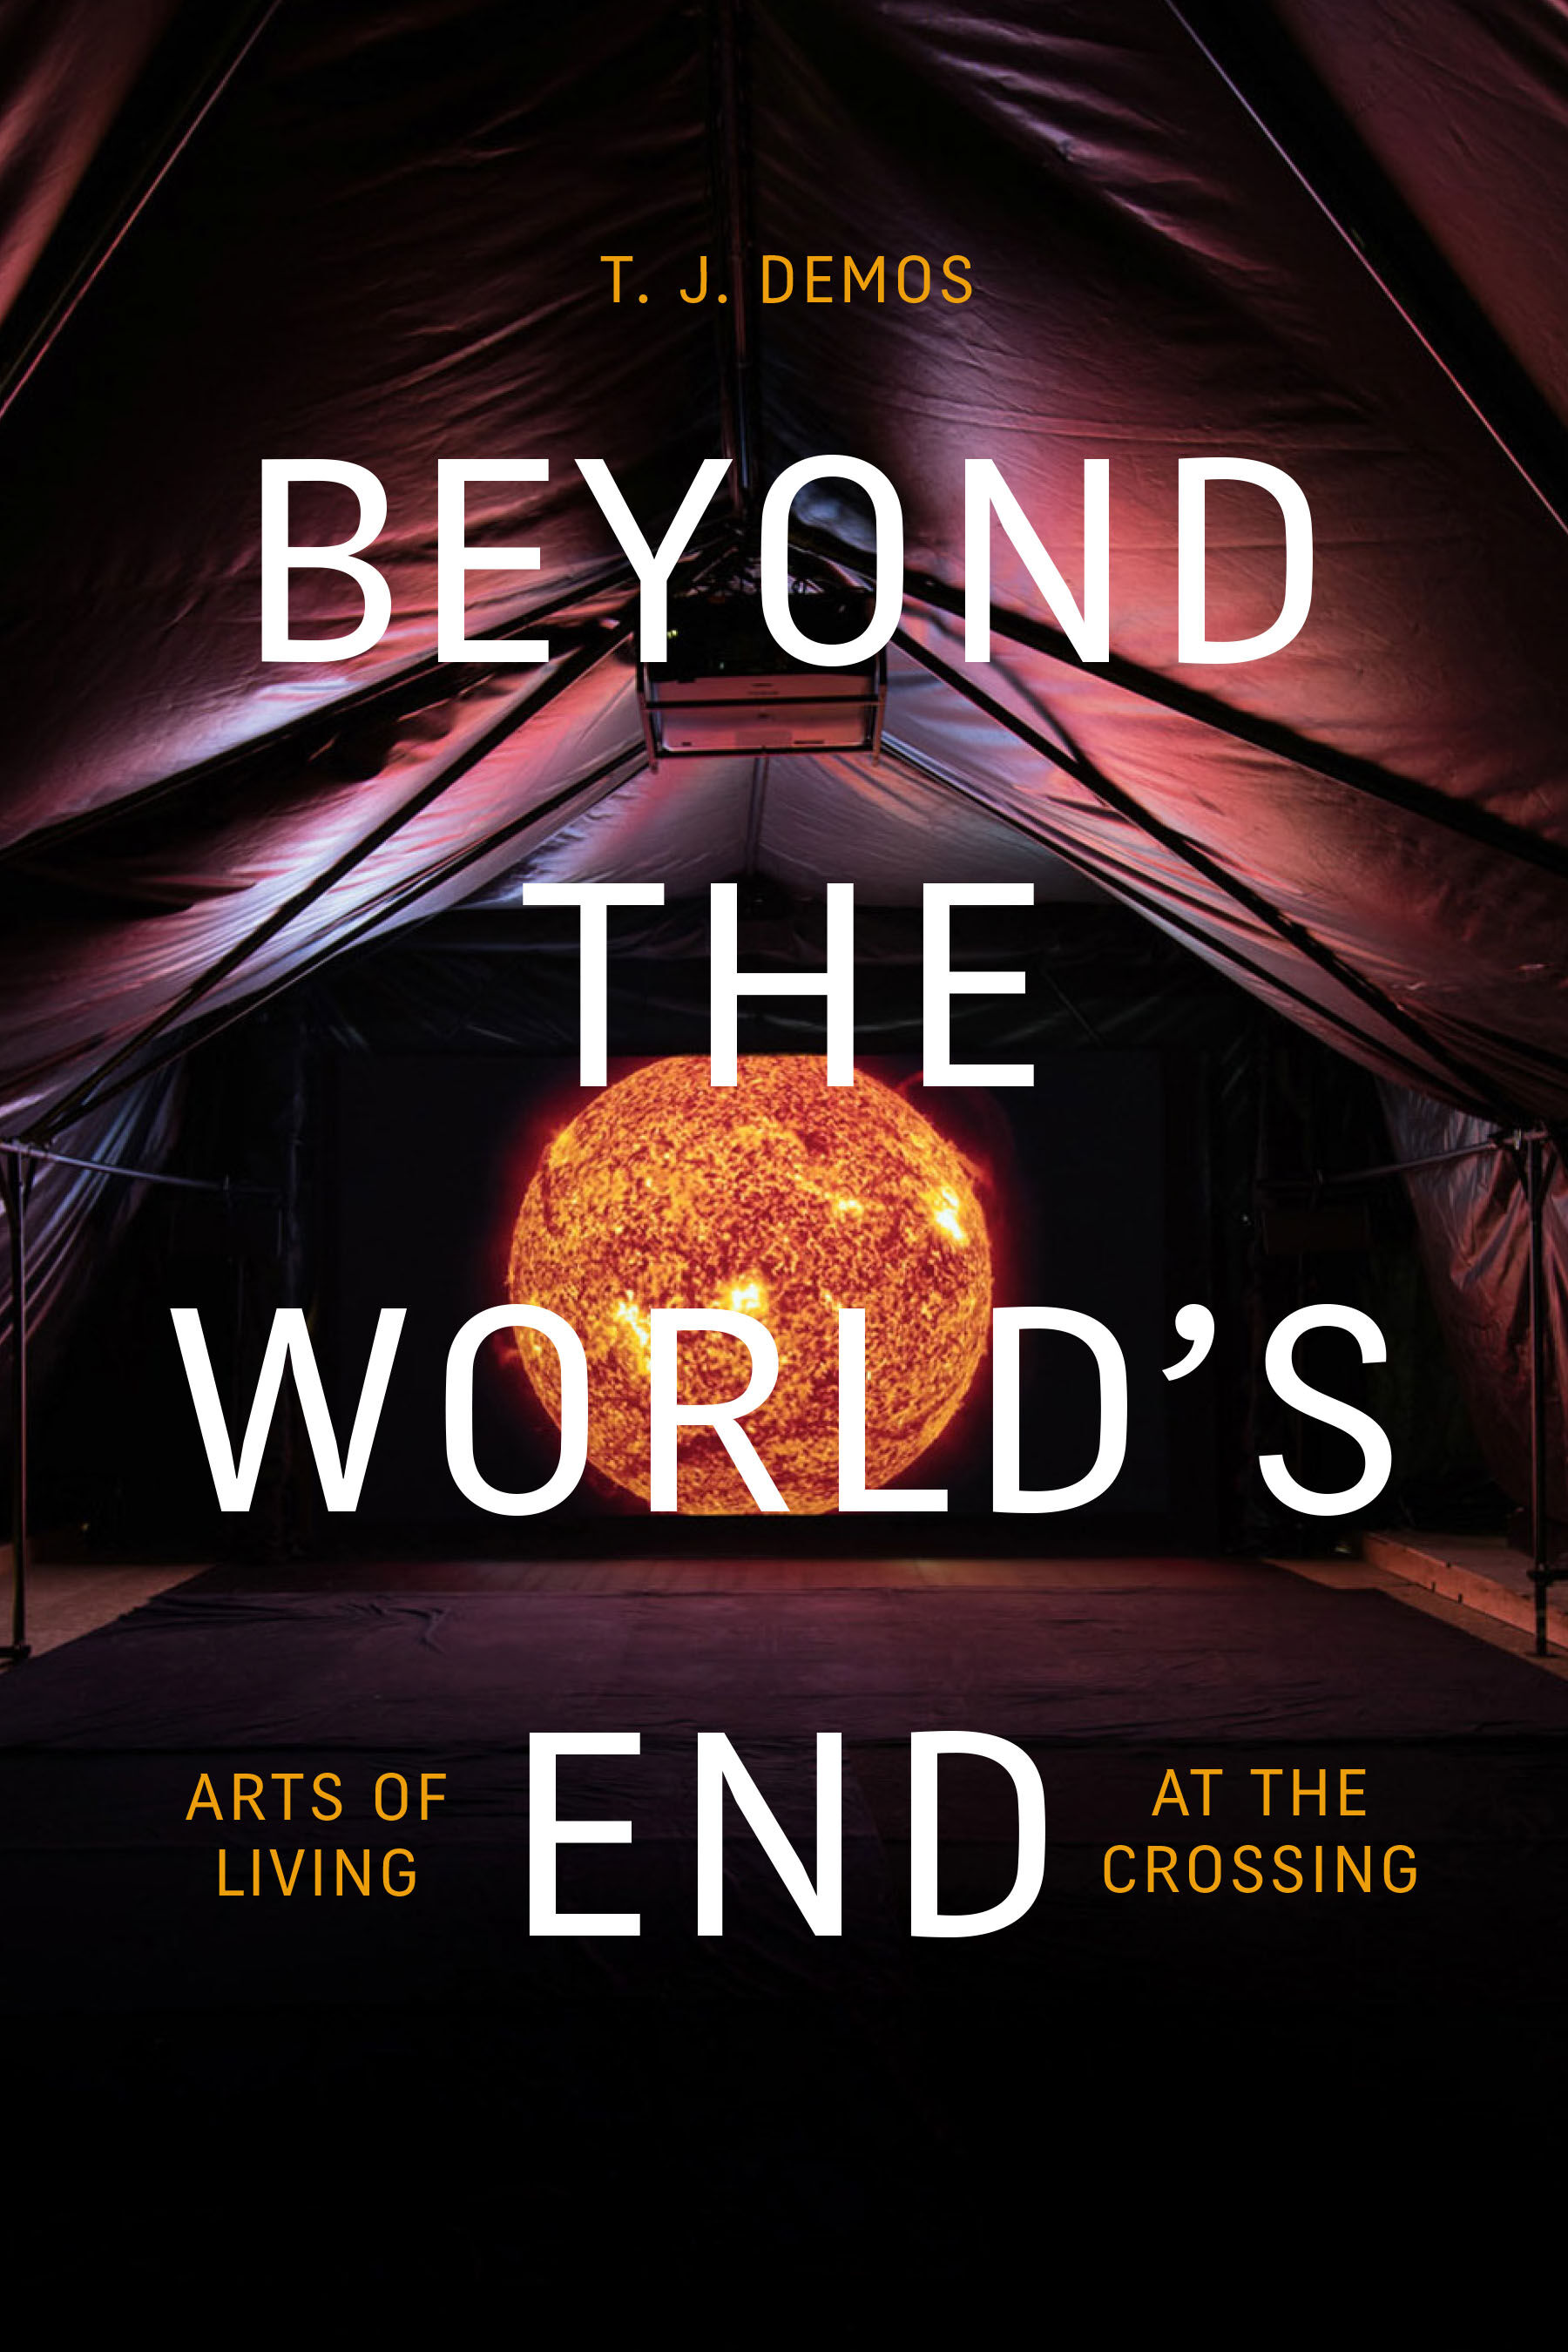 Book review. Demos TJ (2020). Beyond the World’s End: Arts of Living at the Crossing